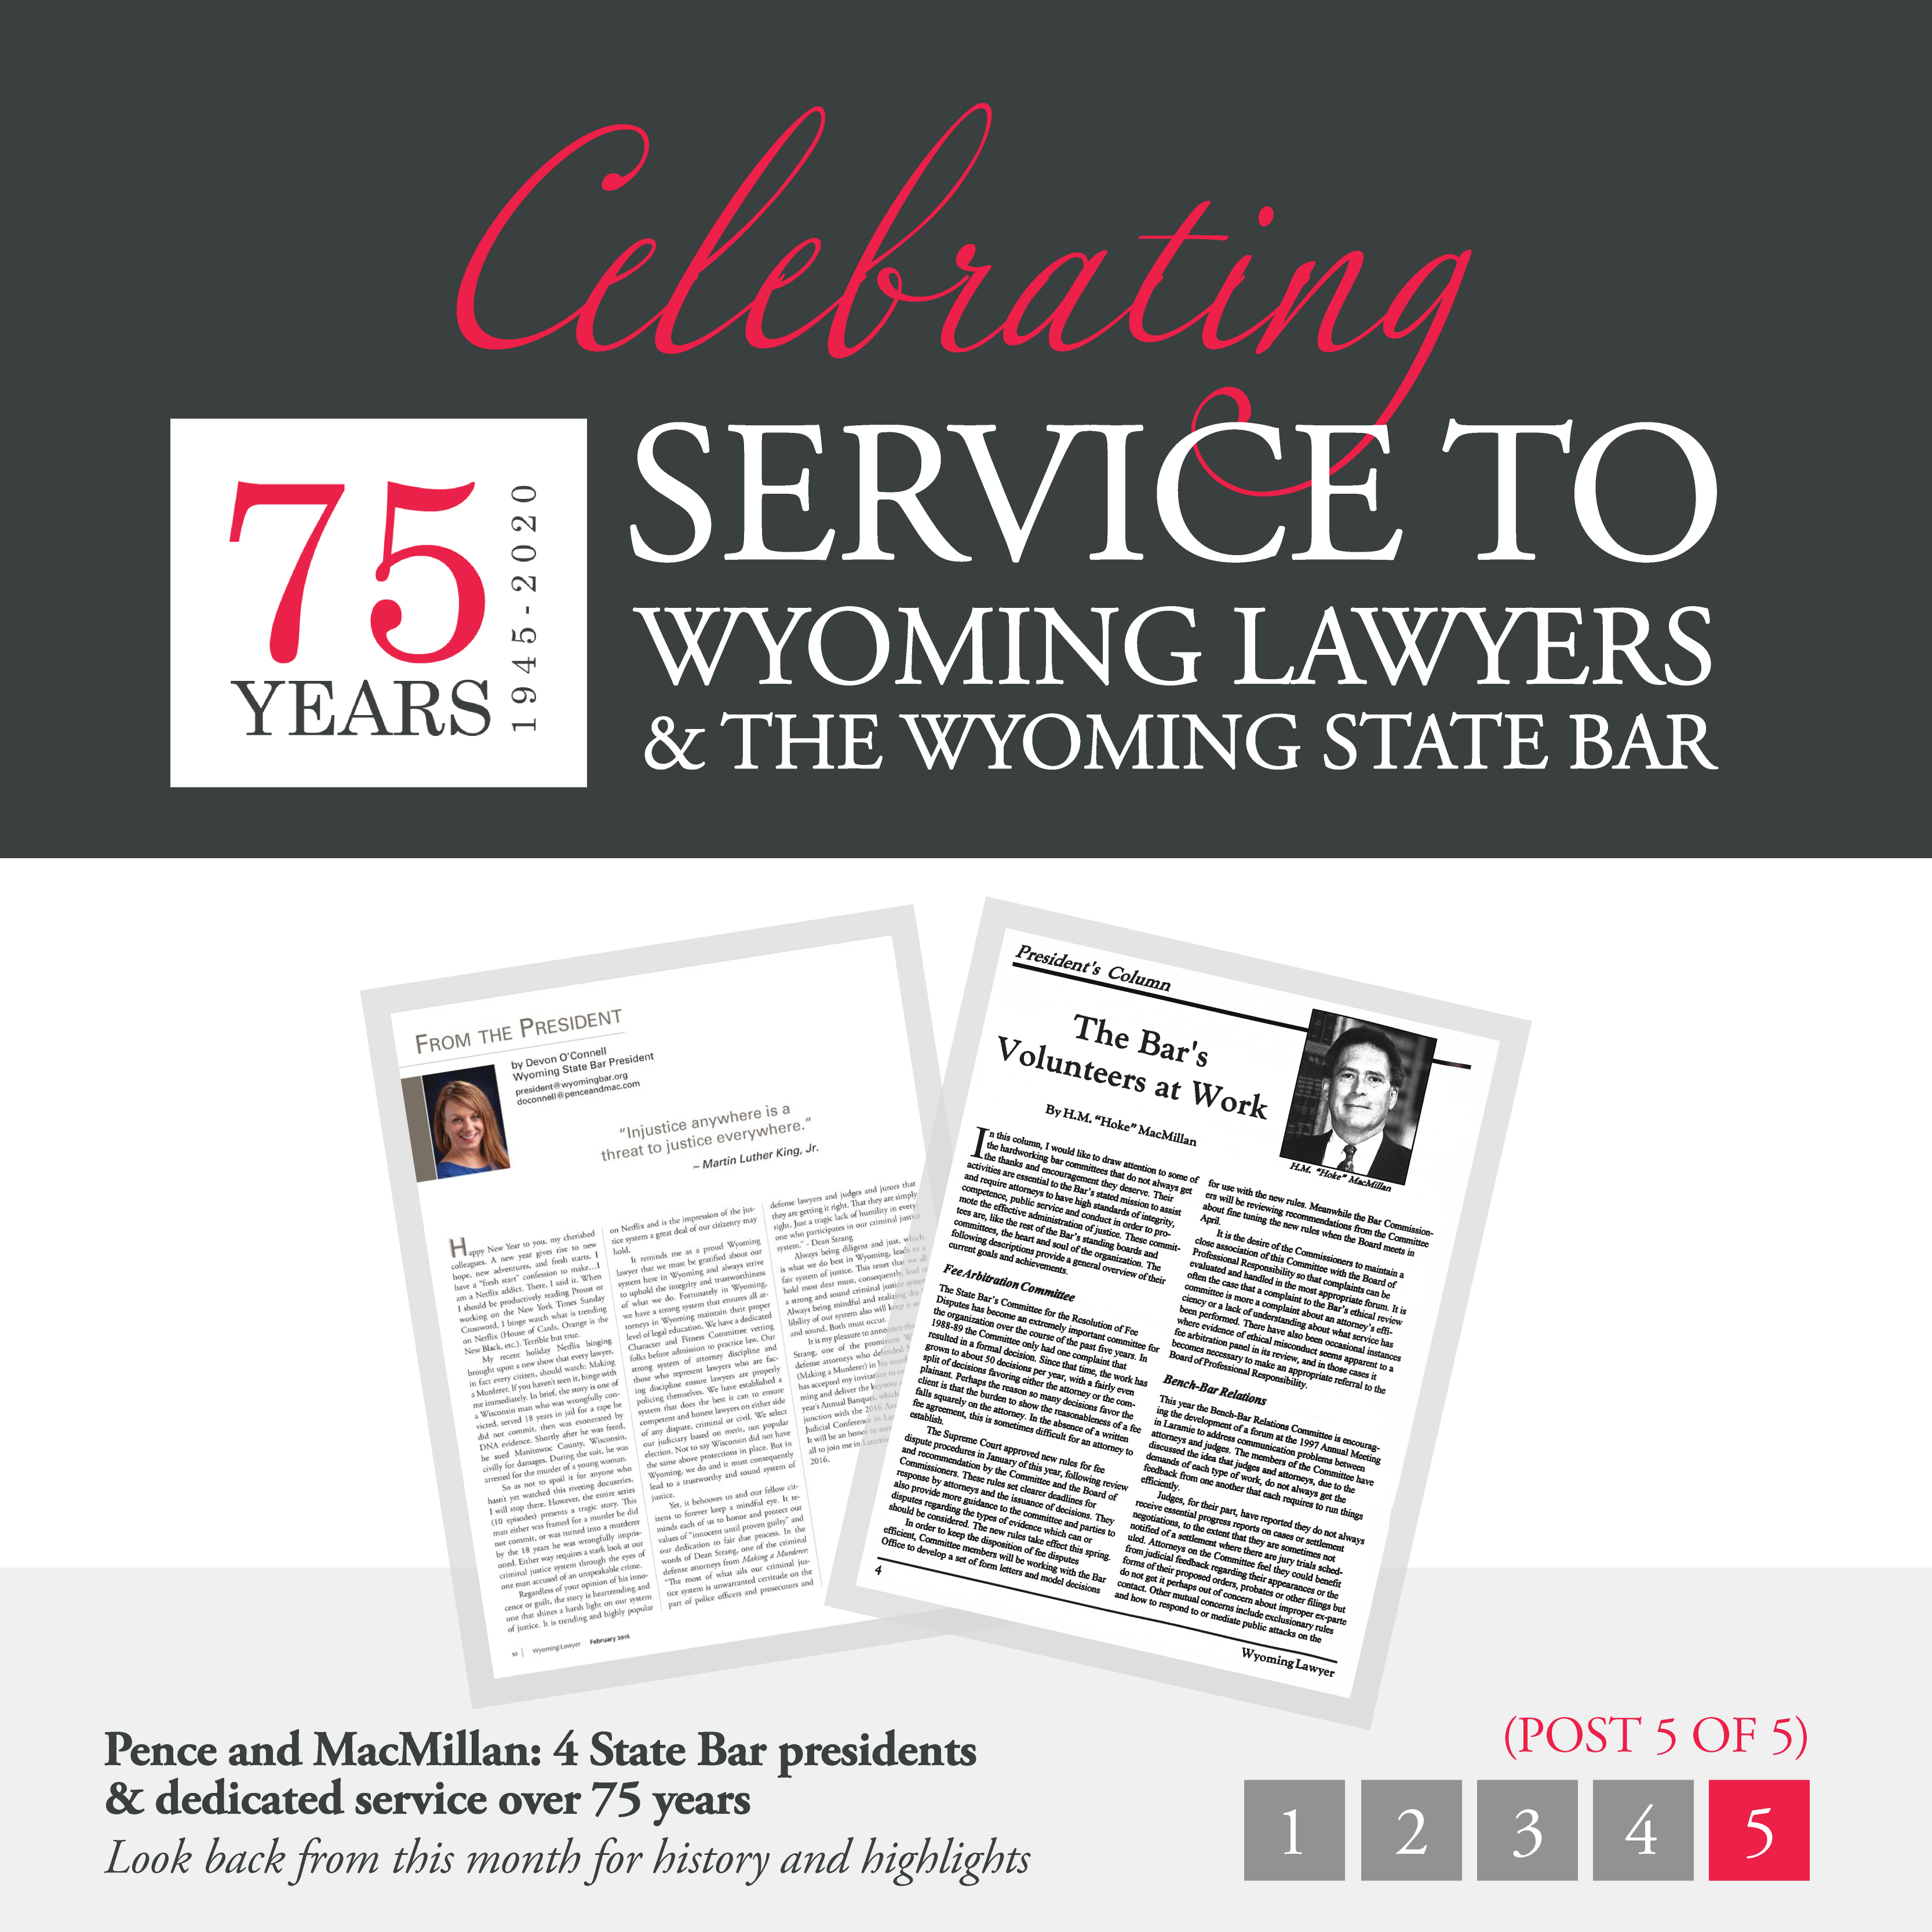 Celebrating 75 Years (1945-2020): Service to Wyoming Lawyers & the Wyoming State Bar.